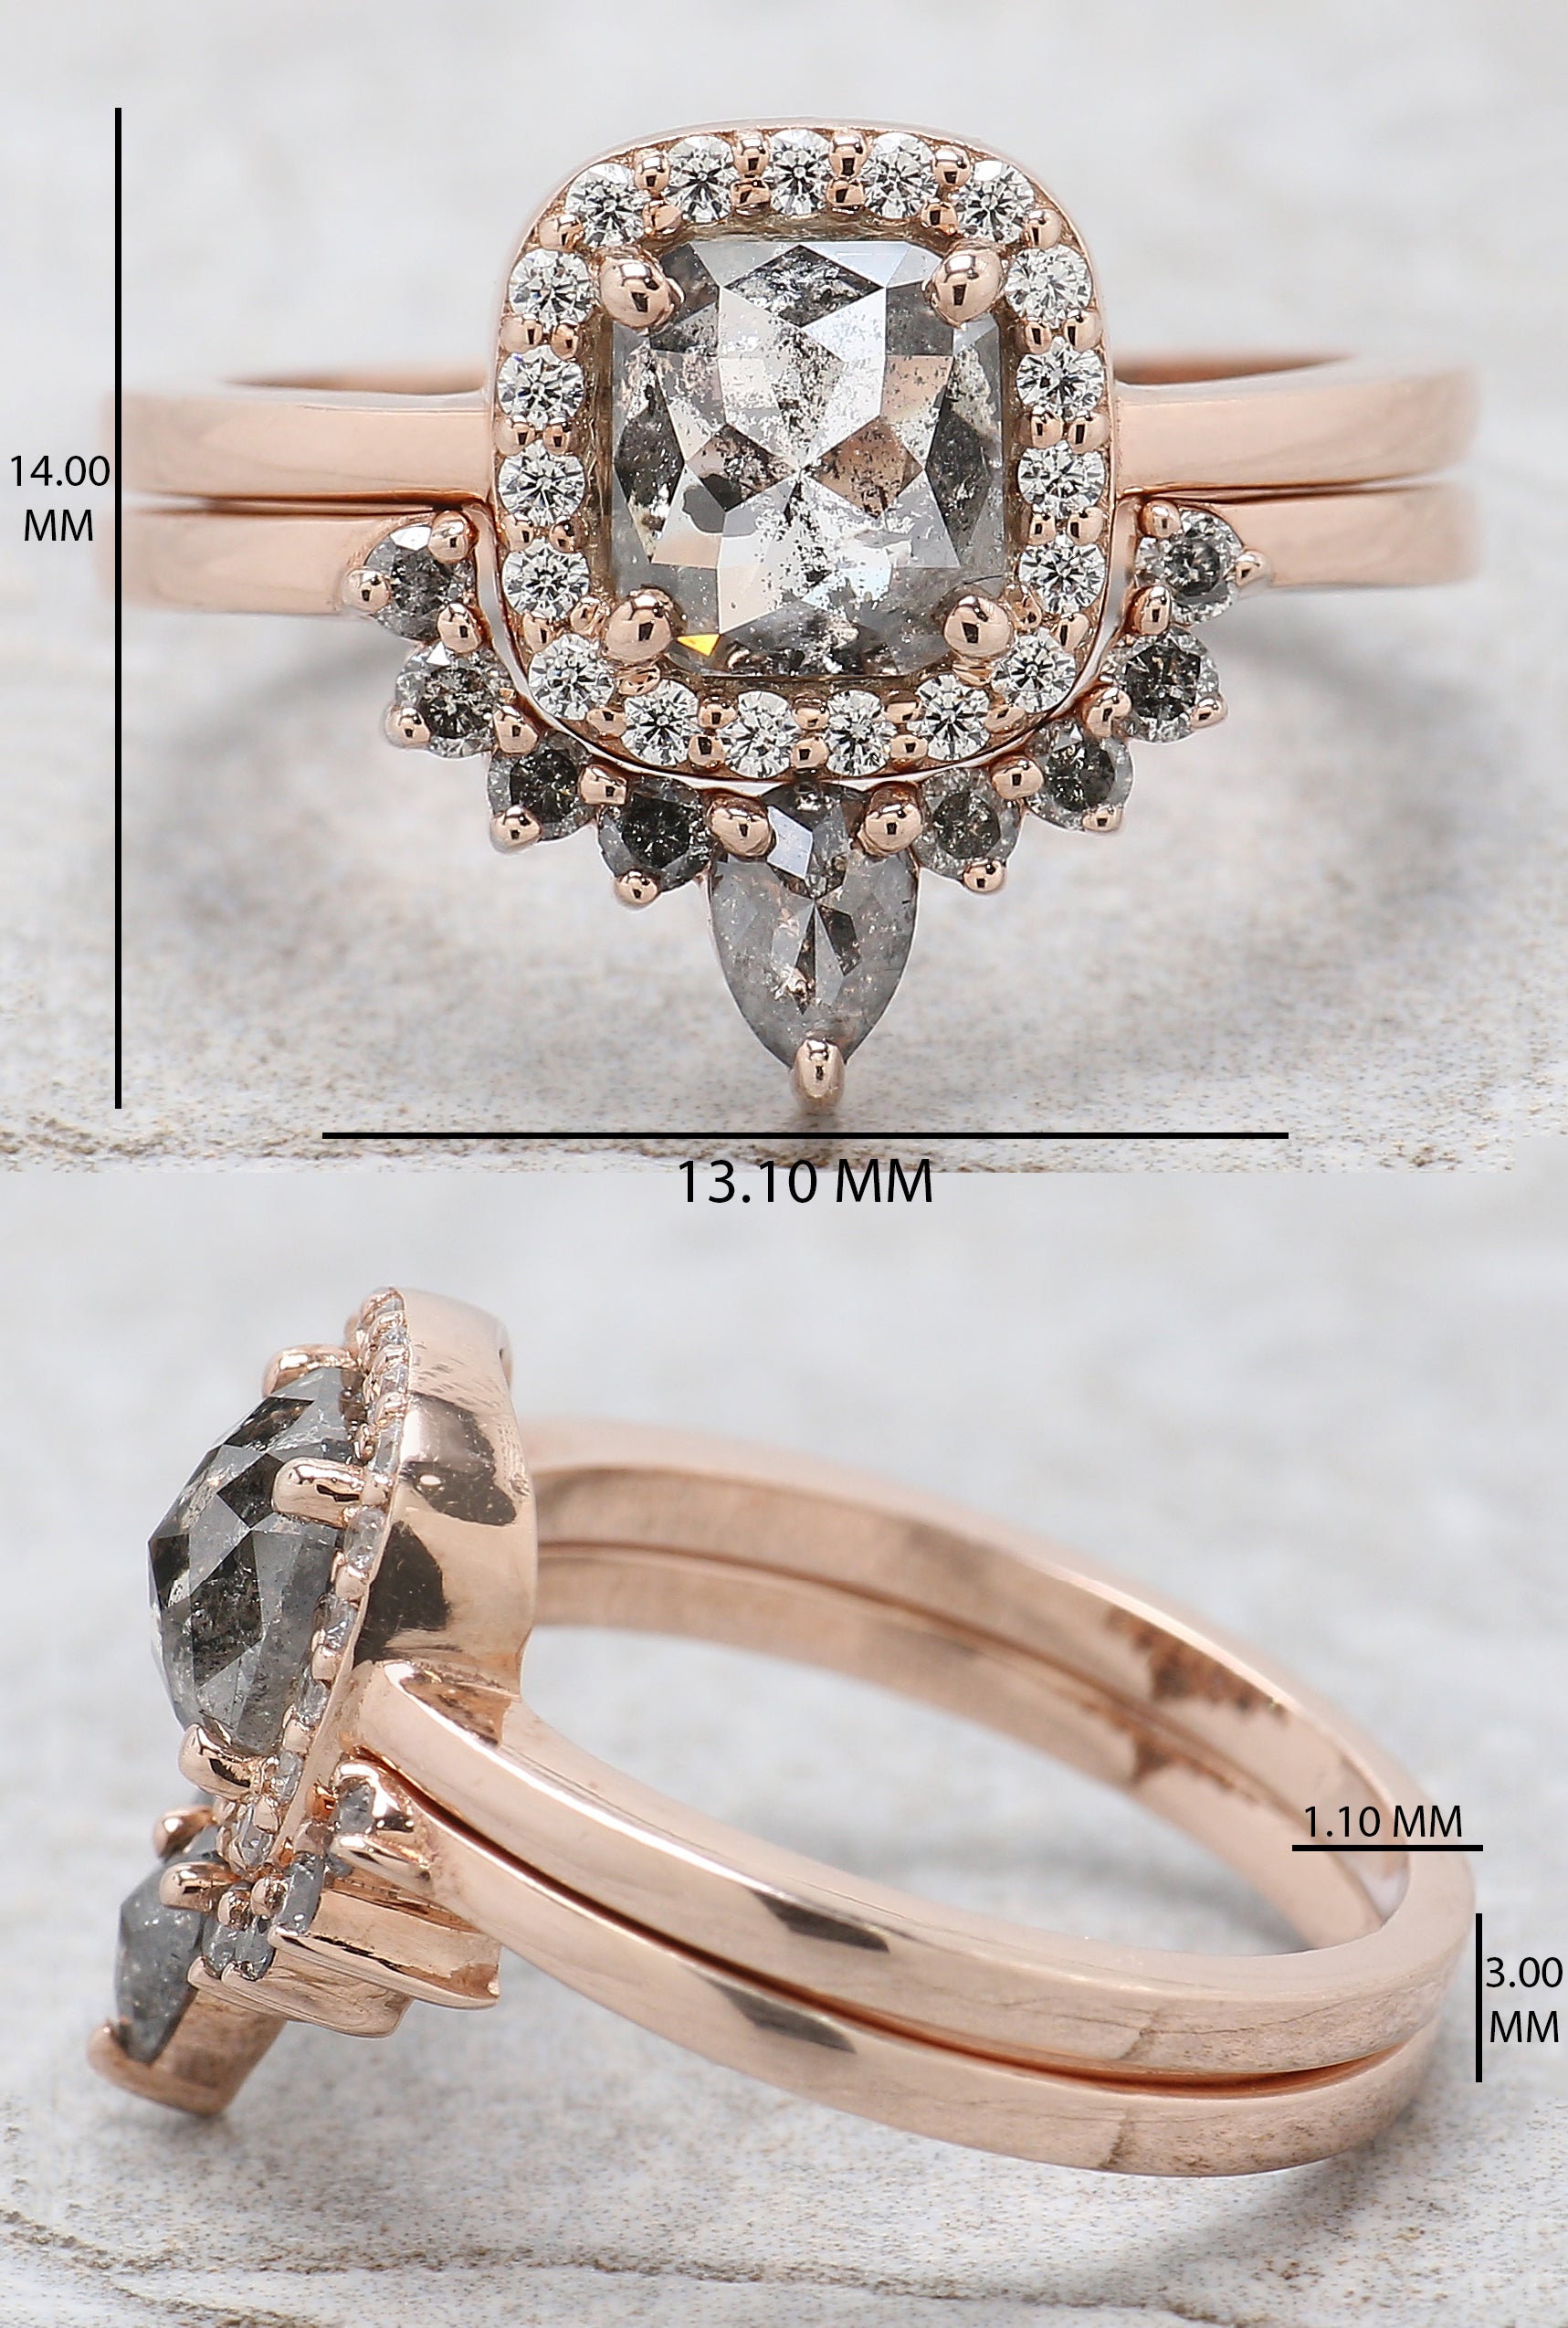 Cushion Cut Salt And Pepper Diamond Ring 1.22 Ct 6.20 MM Cushion Diamond Ring 14K Solid Rose Gold Silver Engagement Ring Gift For Her QL9594